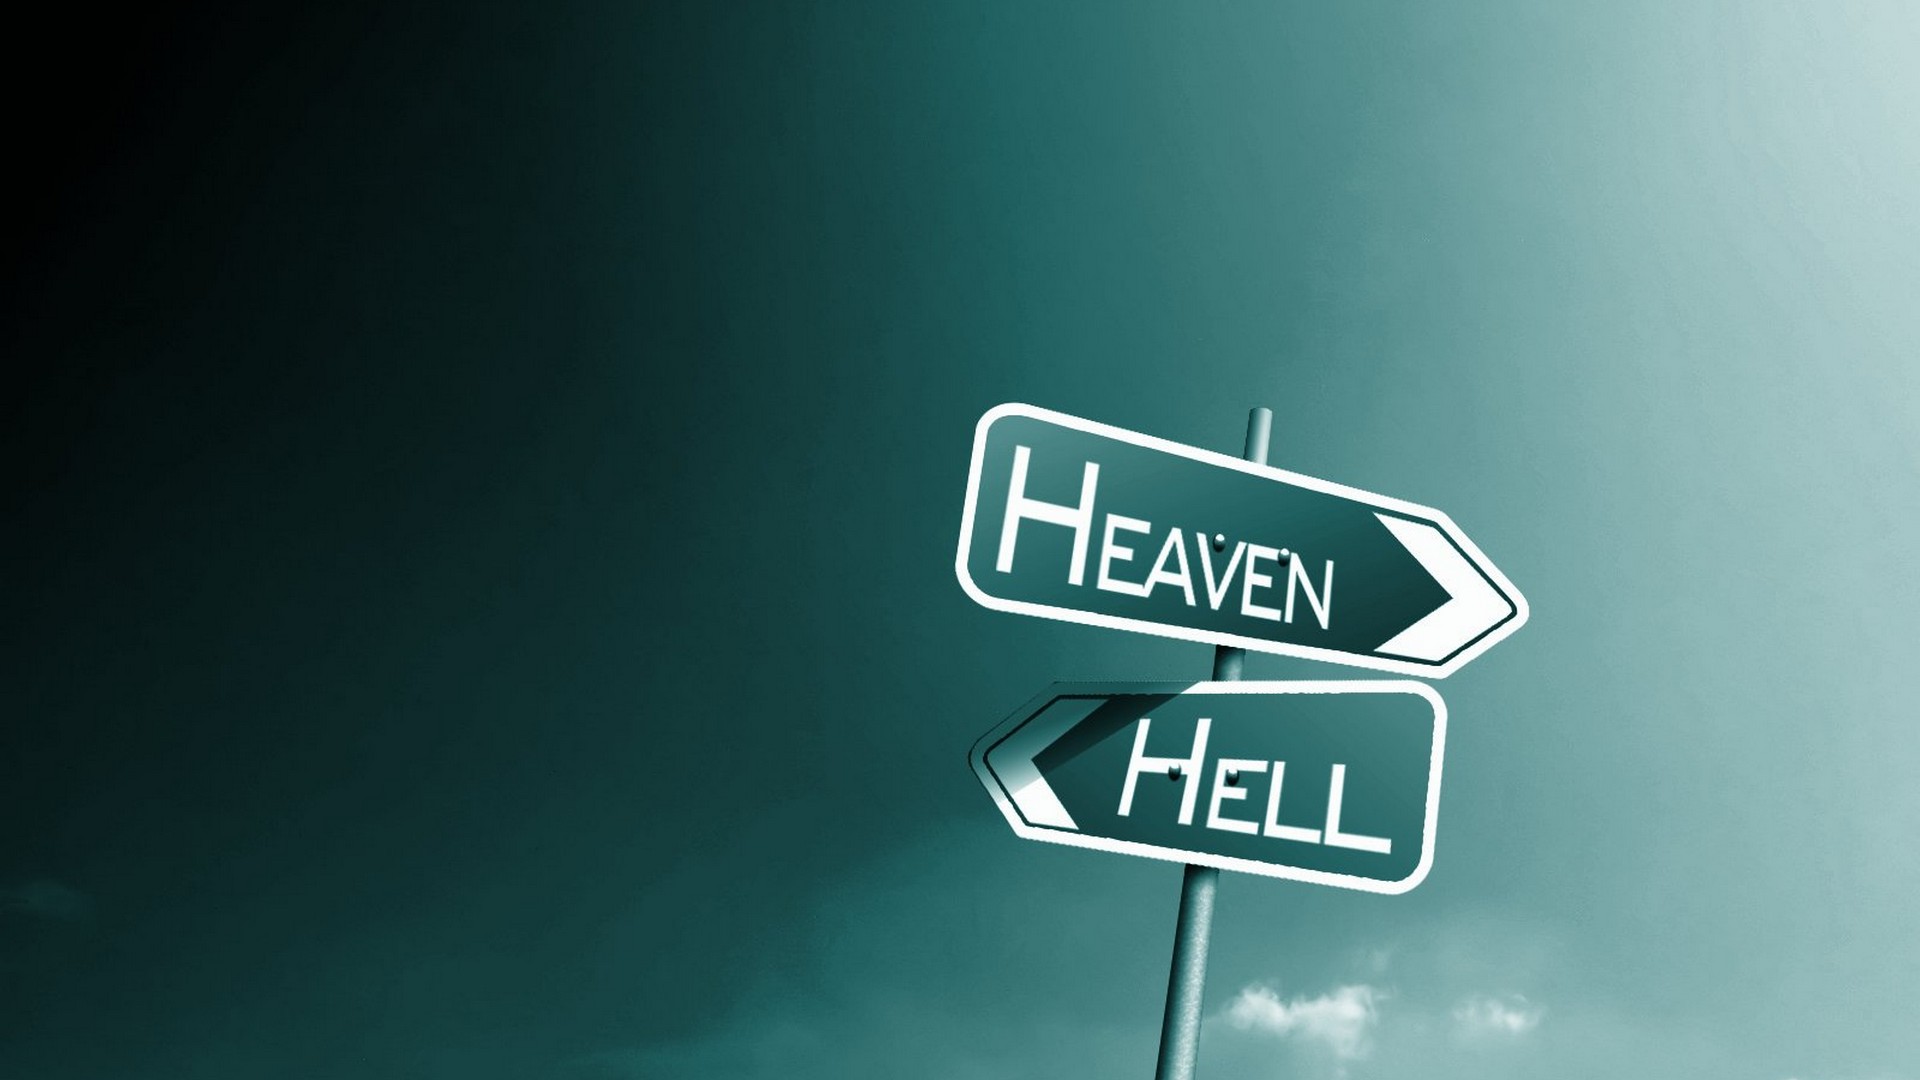 Heaven Hell Sign 1920x1080